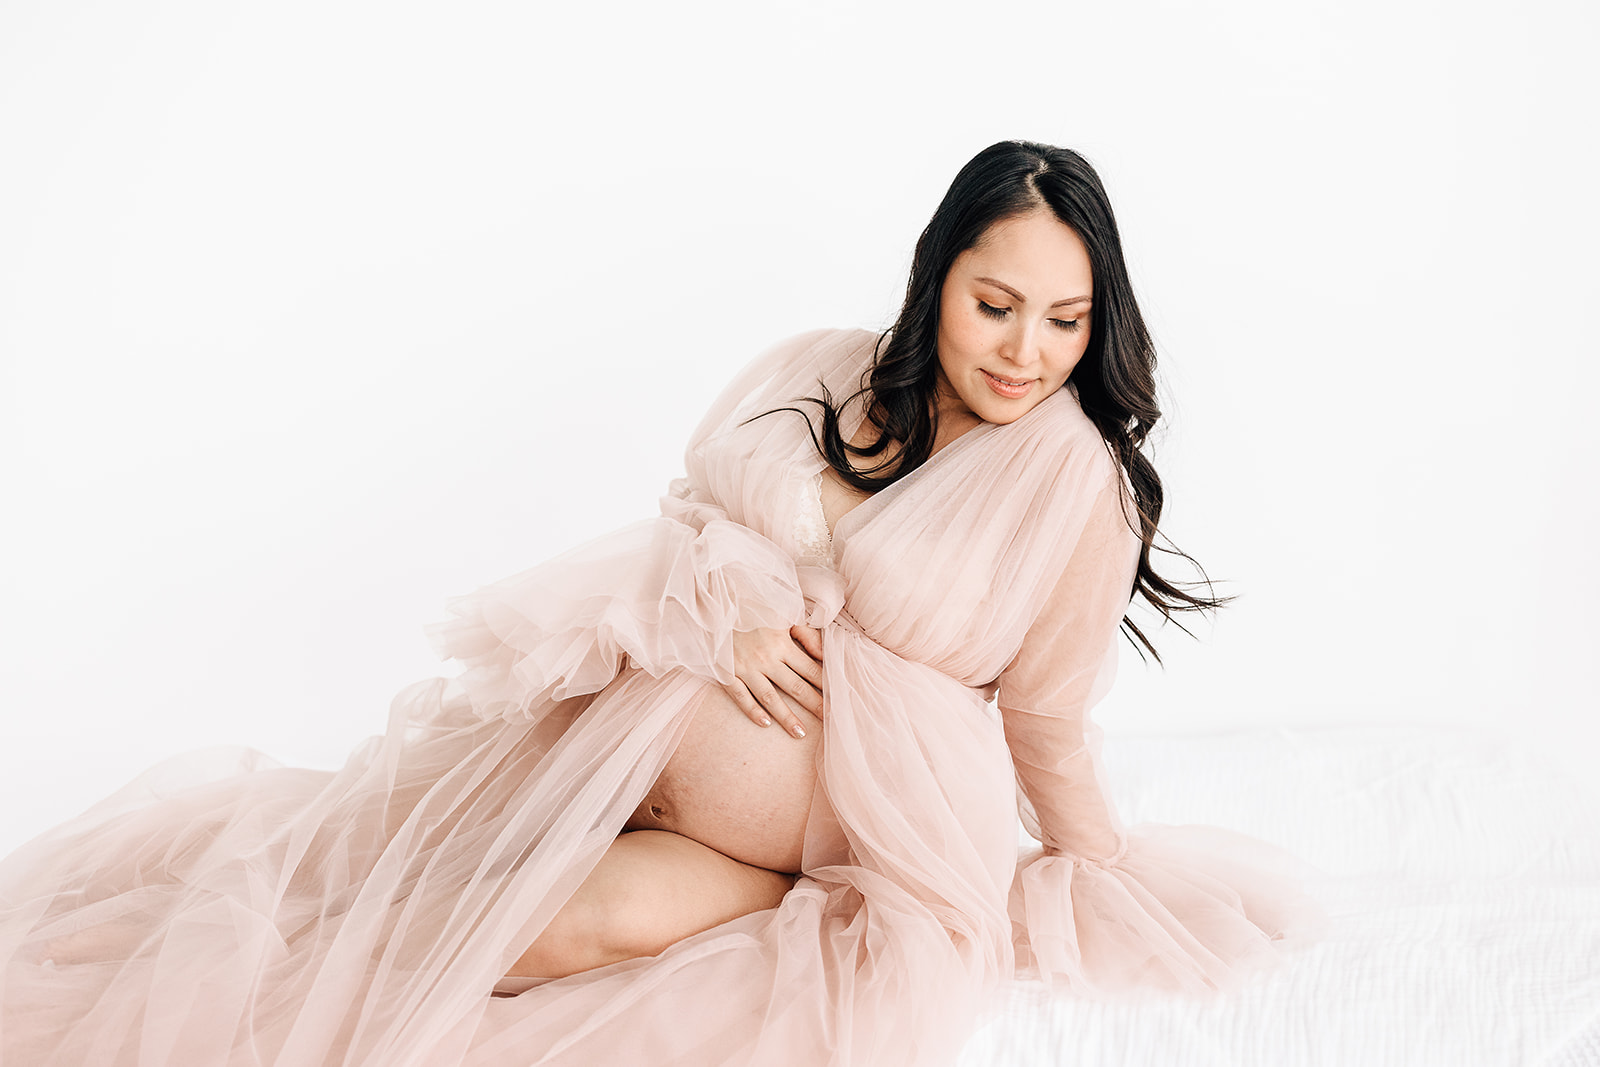 A mom to be lays across a bed in a pink maternity gown with bump exposed St. Louis Prenatal Massage